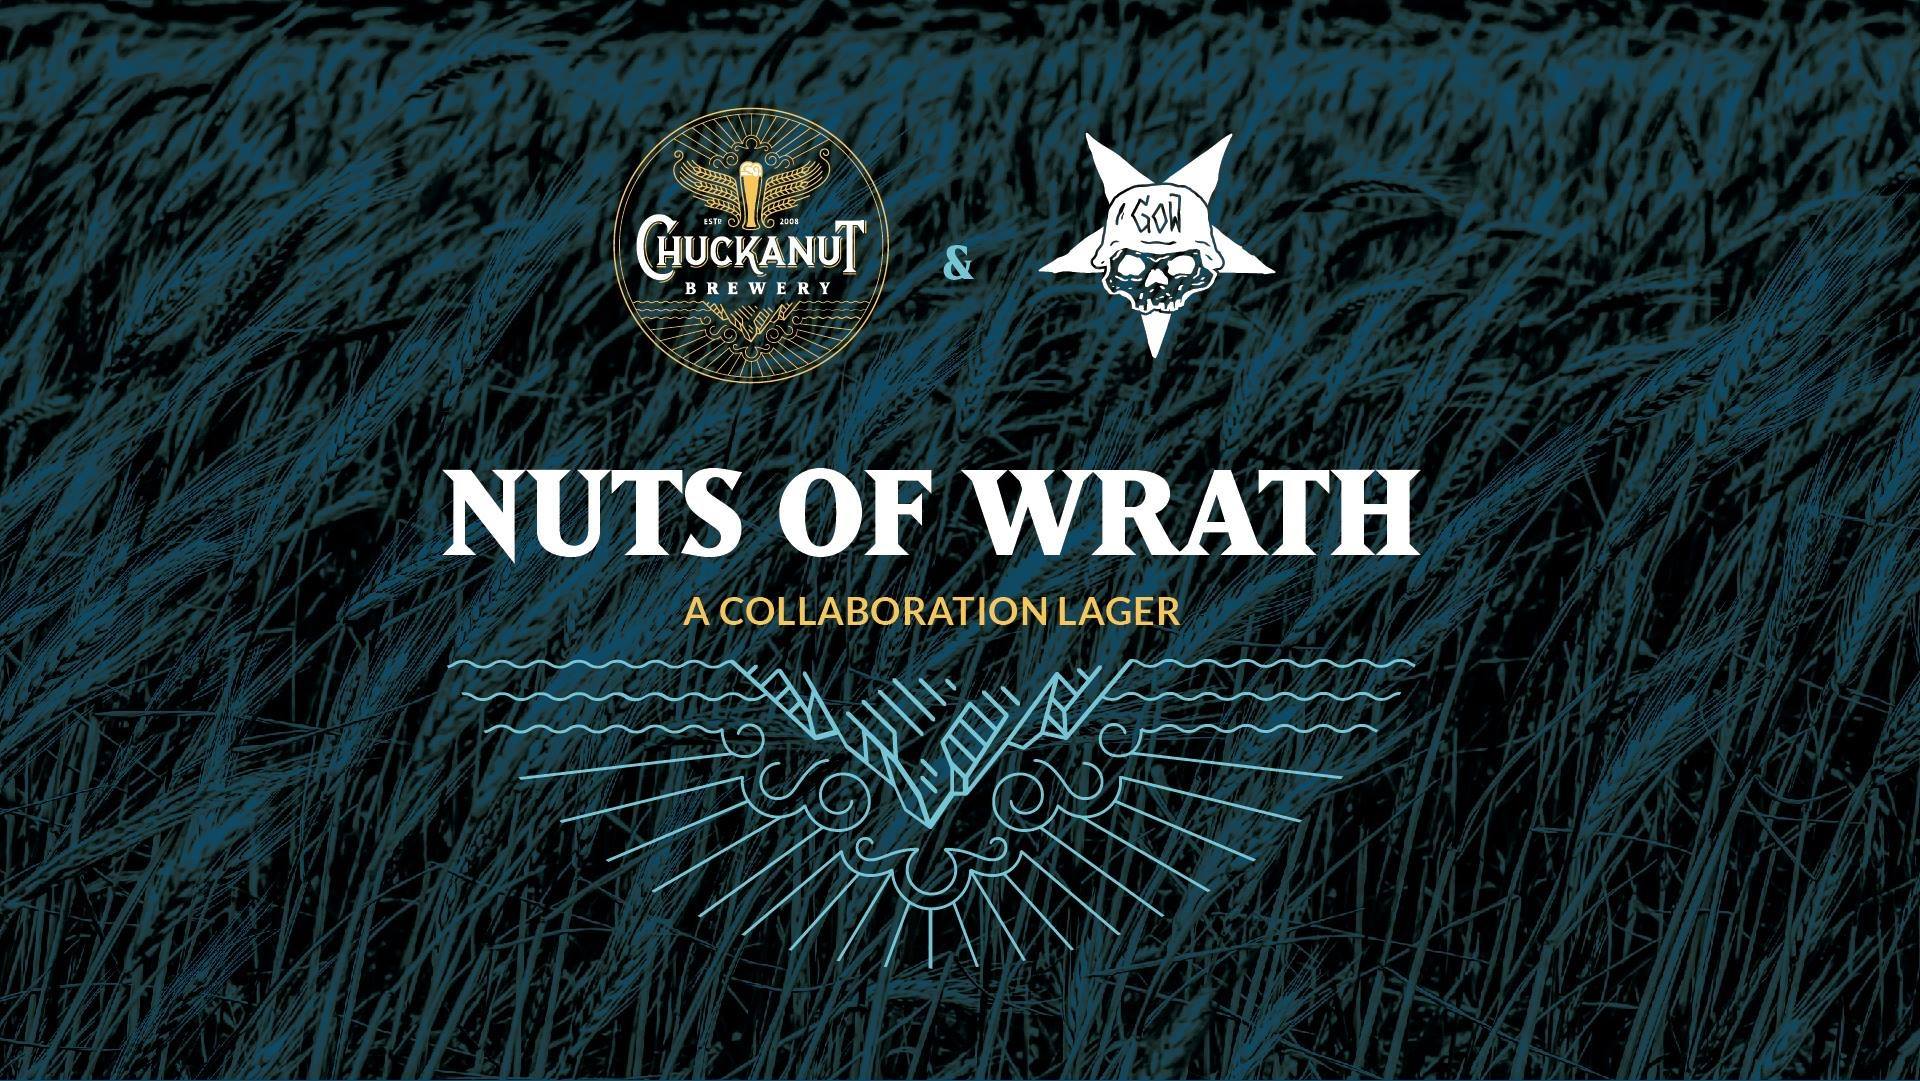 Chuckanut Brewery and Grains of Wrath Collaborate on Nuts of Wrath